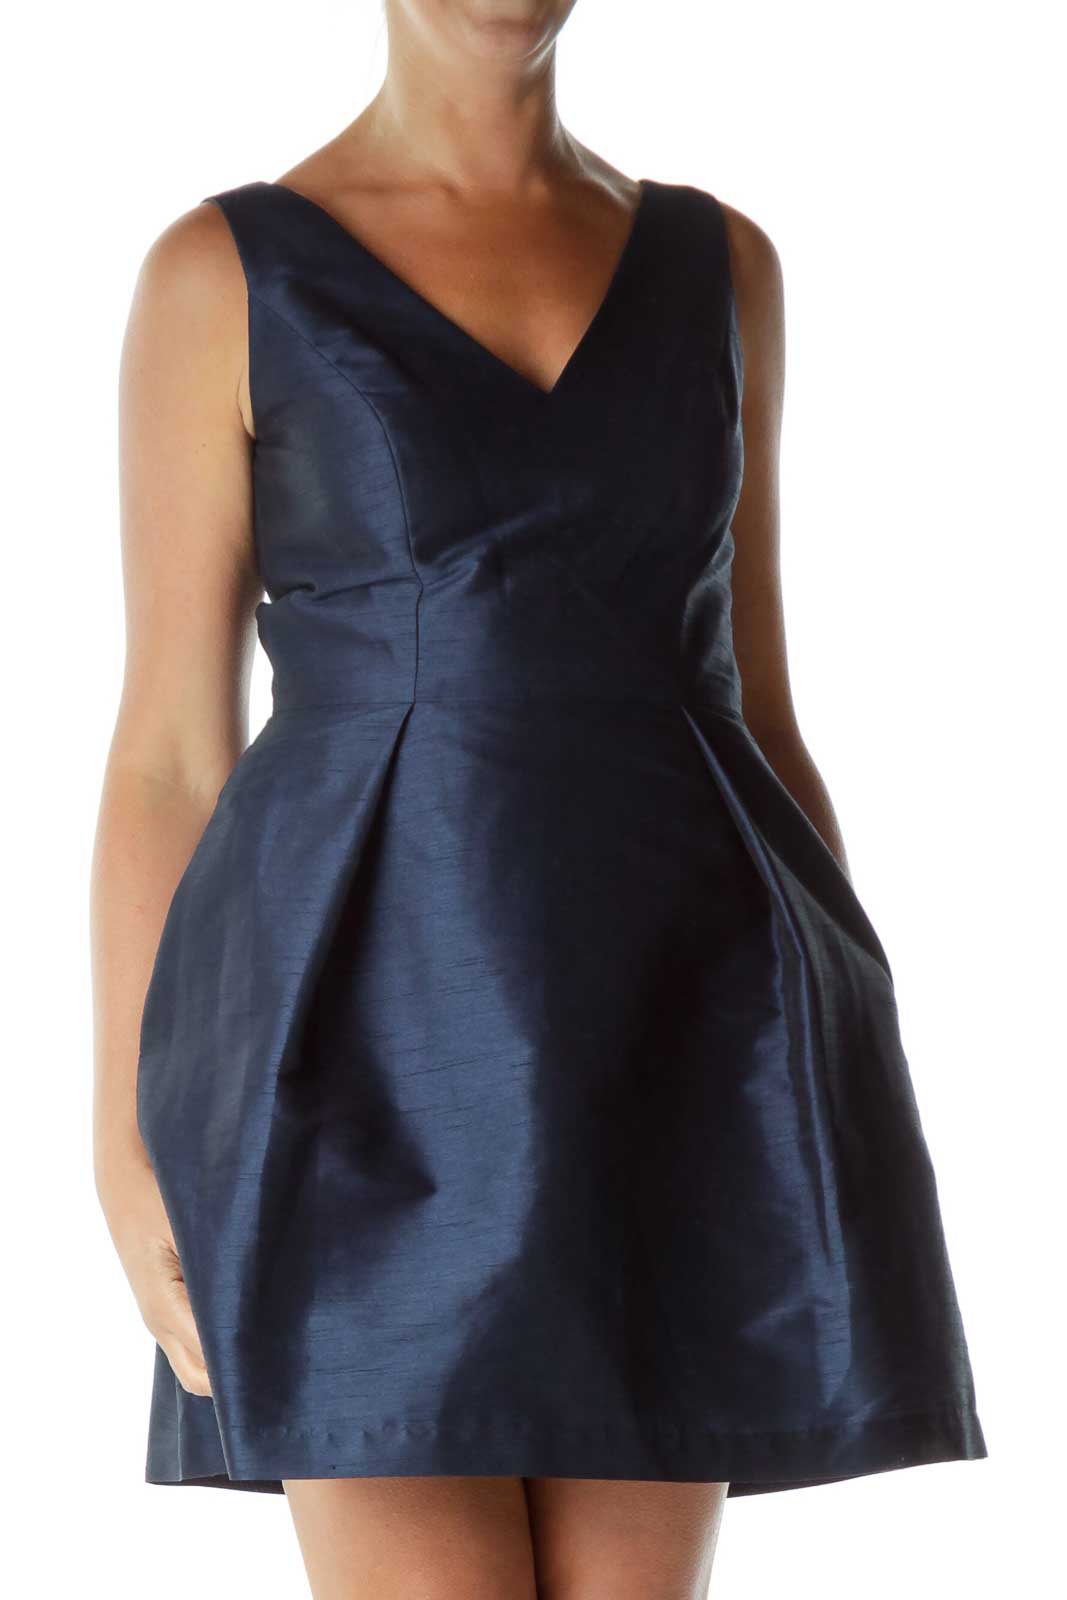 Navy Sleeveless A-Line Cocktail Dress Front